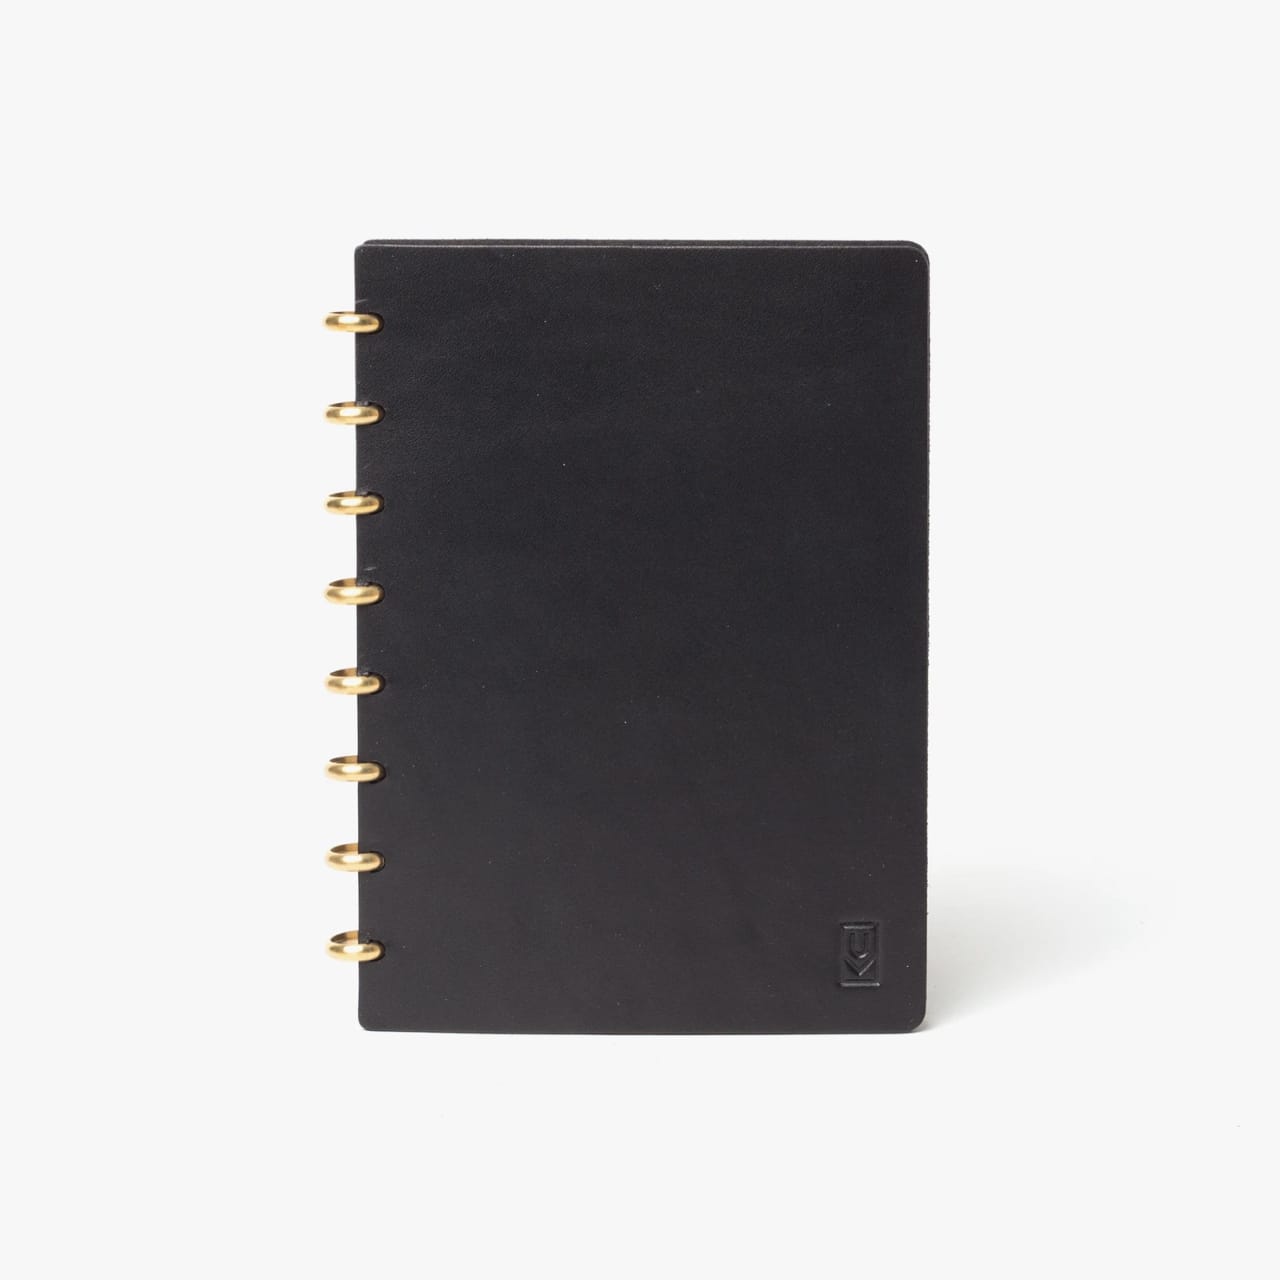 Black leather journal with brass disc binding.